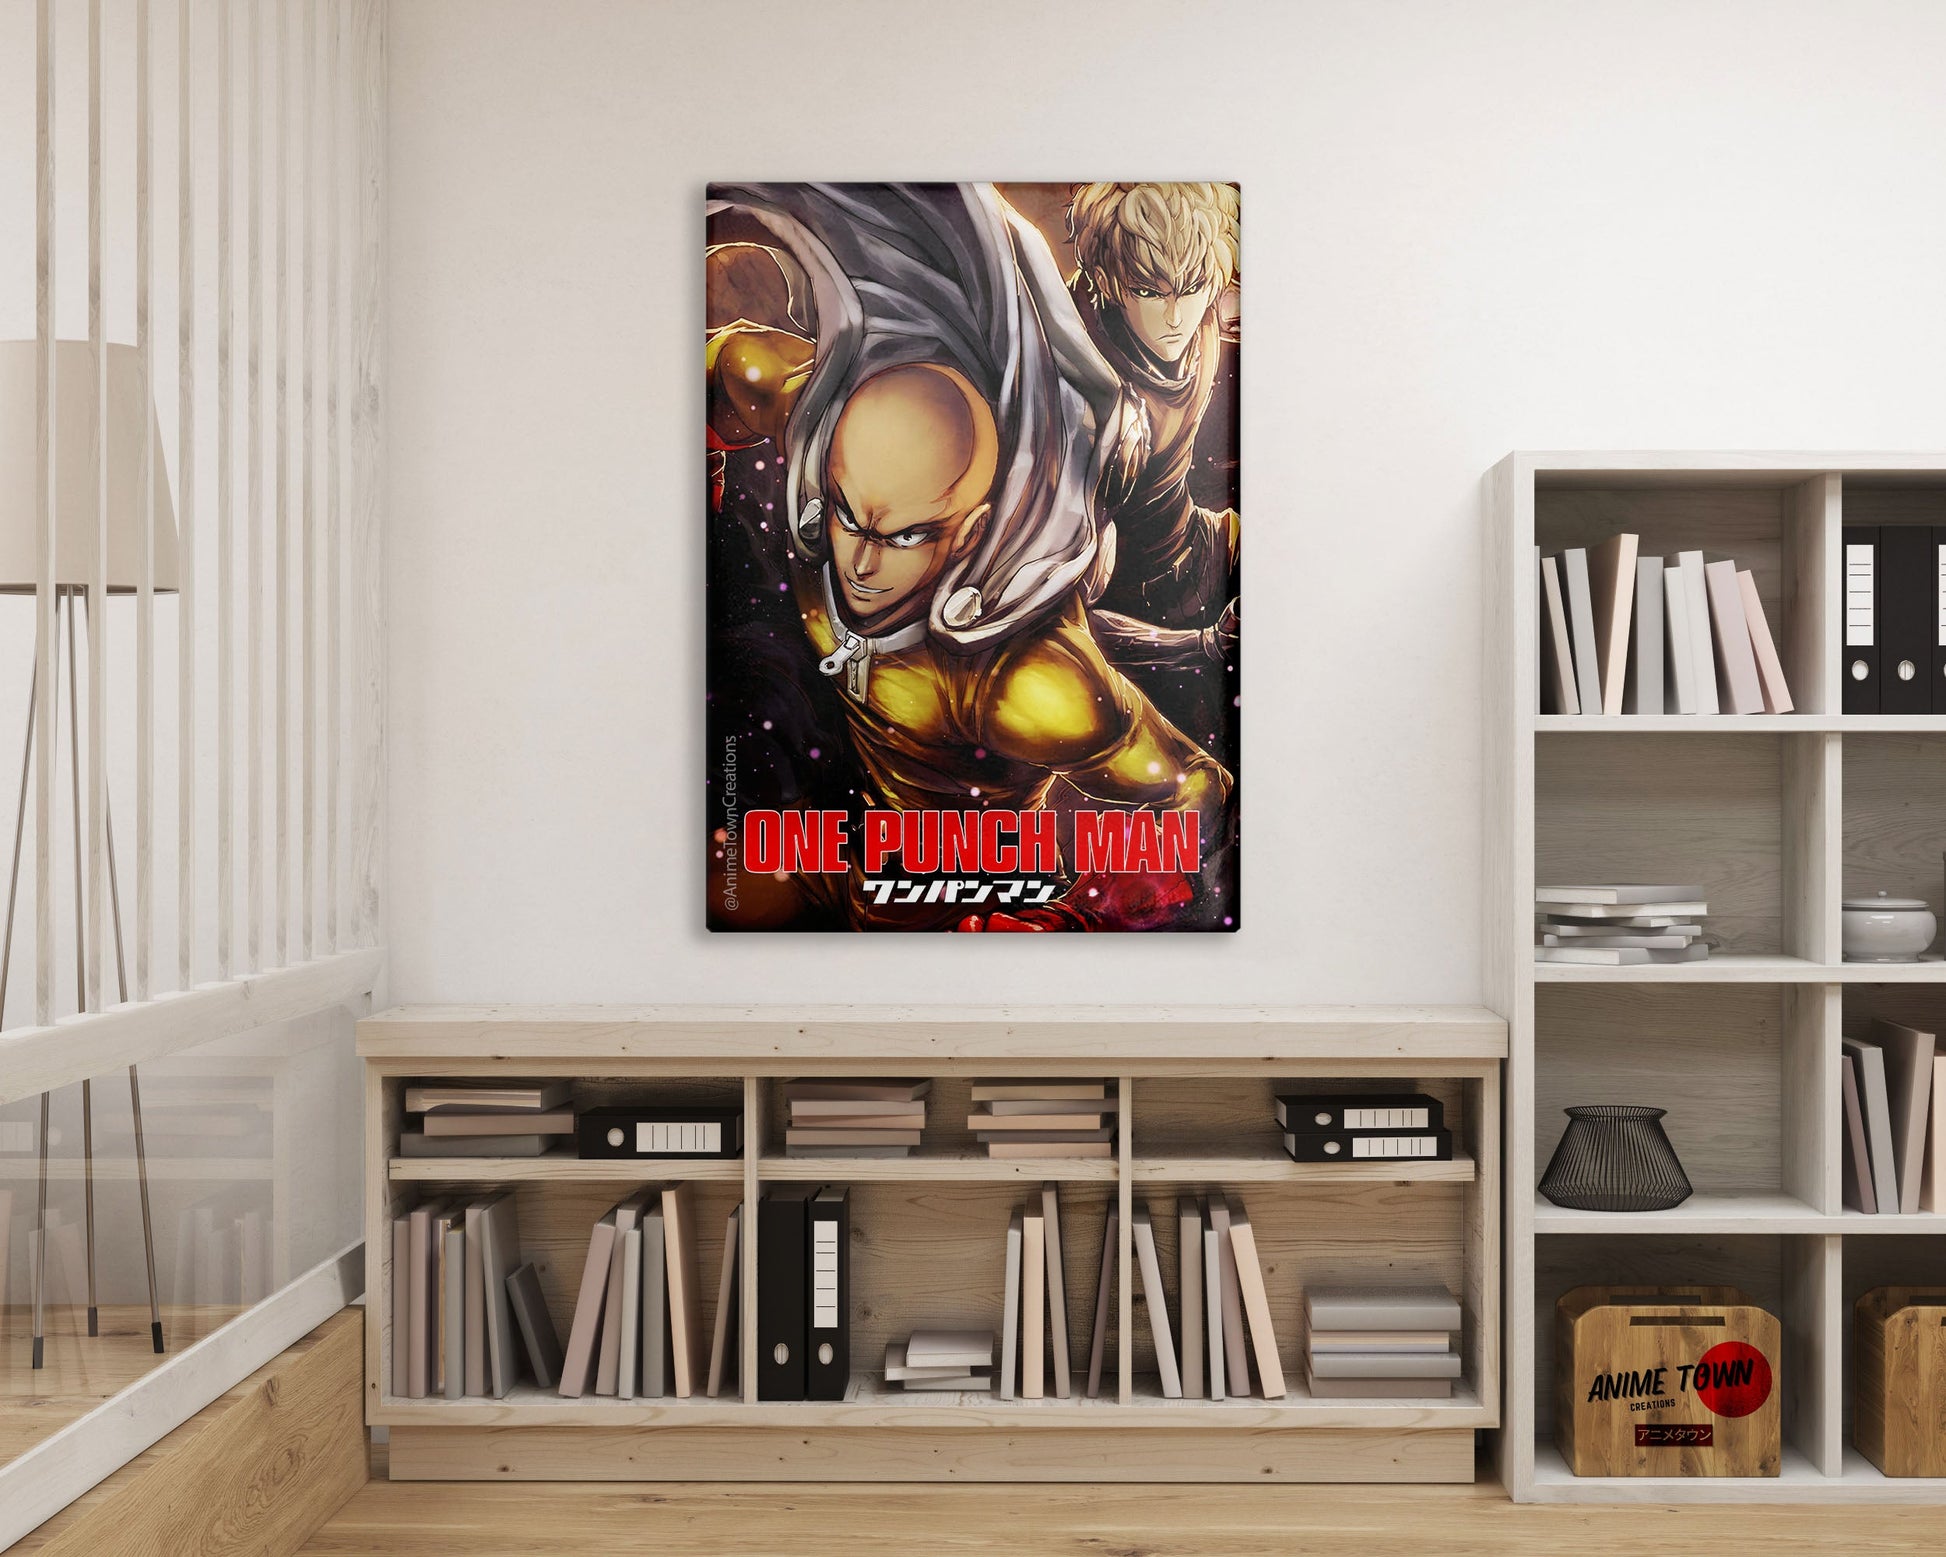 Anime Town Creations Metal Poster One Punch Man 11" x 17" Home Goods - Anime One Punch Man Metal Poster